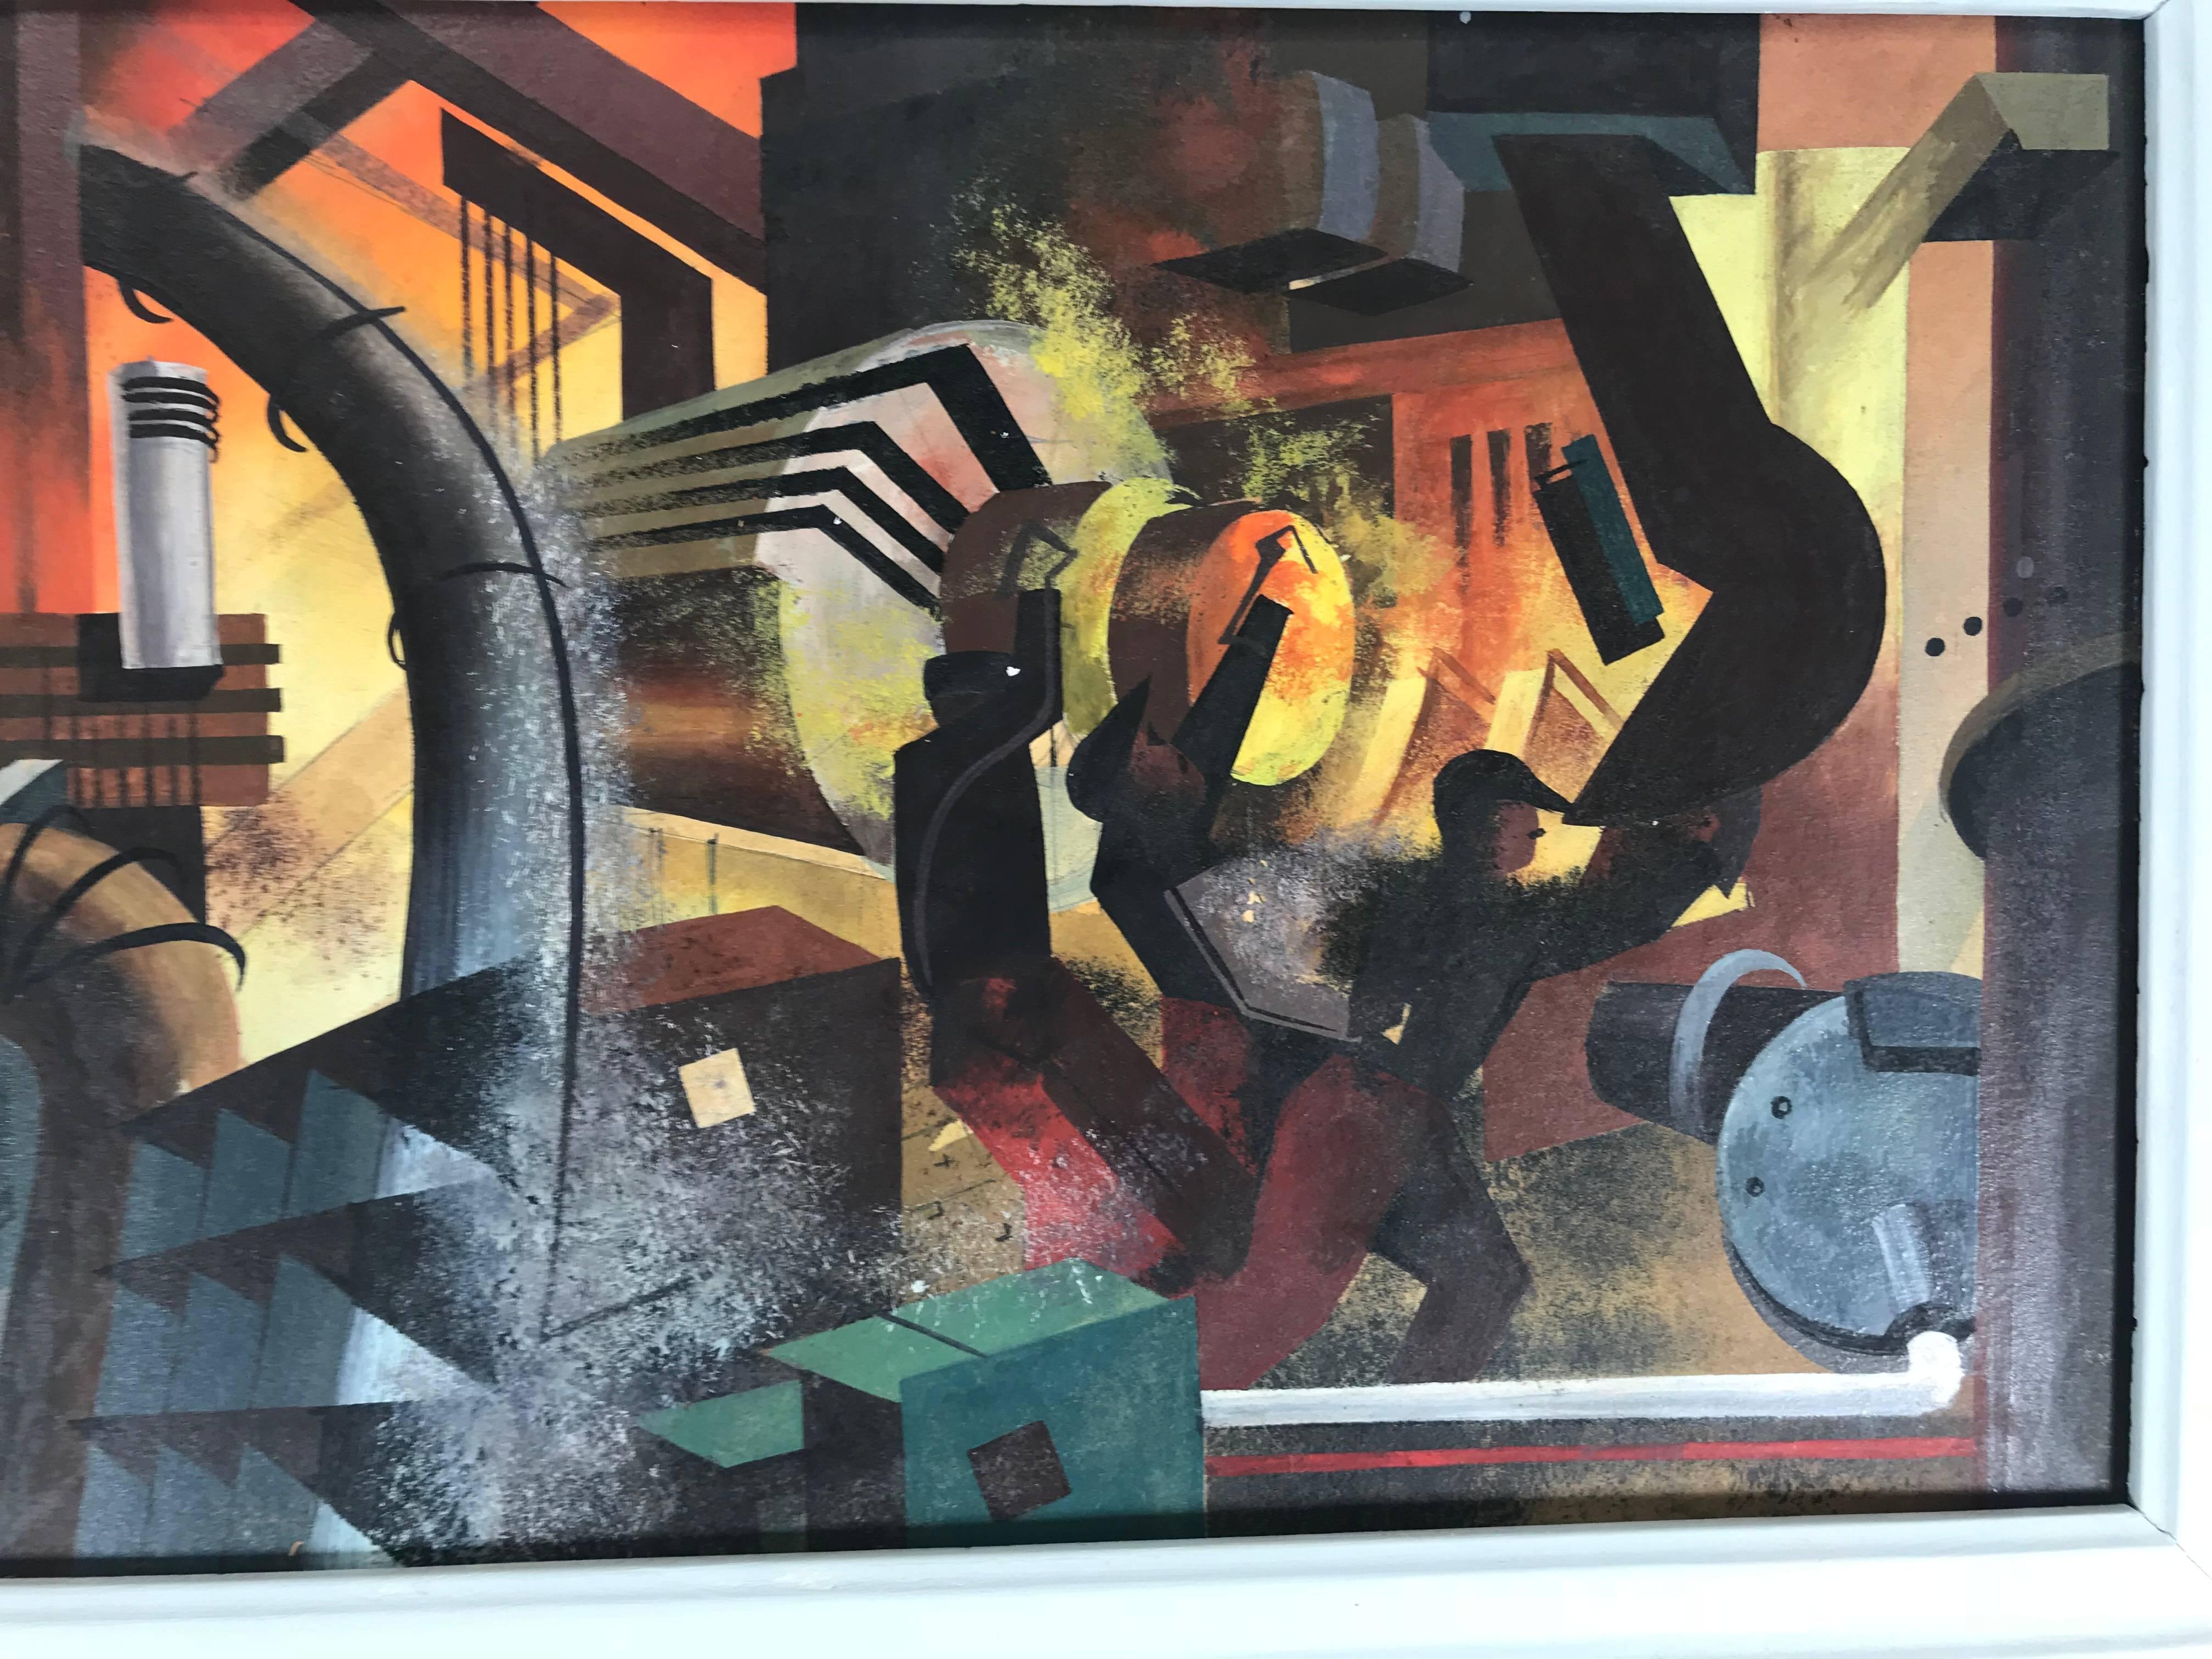 Well executed modern industrialist oil painting, futuristic factory workers. Amazing use of color, texture and space. Artist unknown. Mark Kostabi meets Fernand Leger.